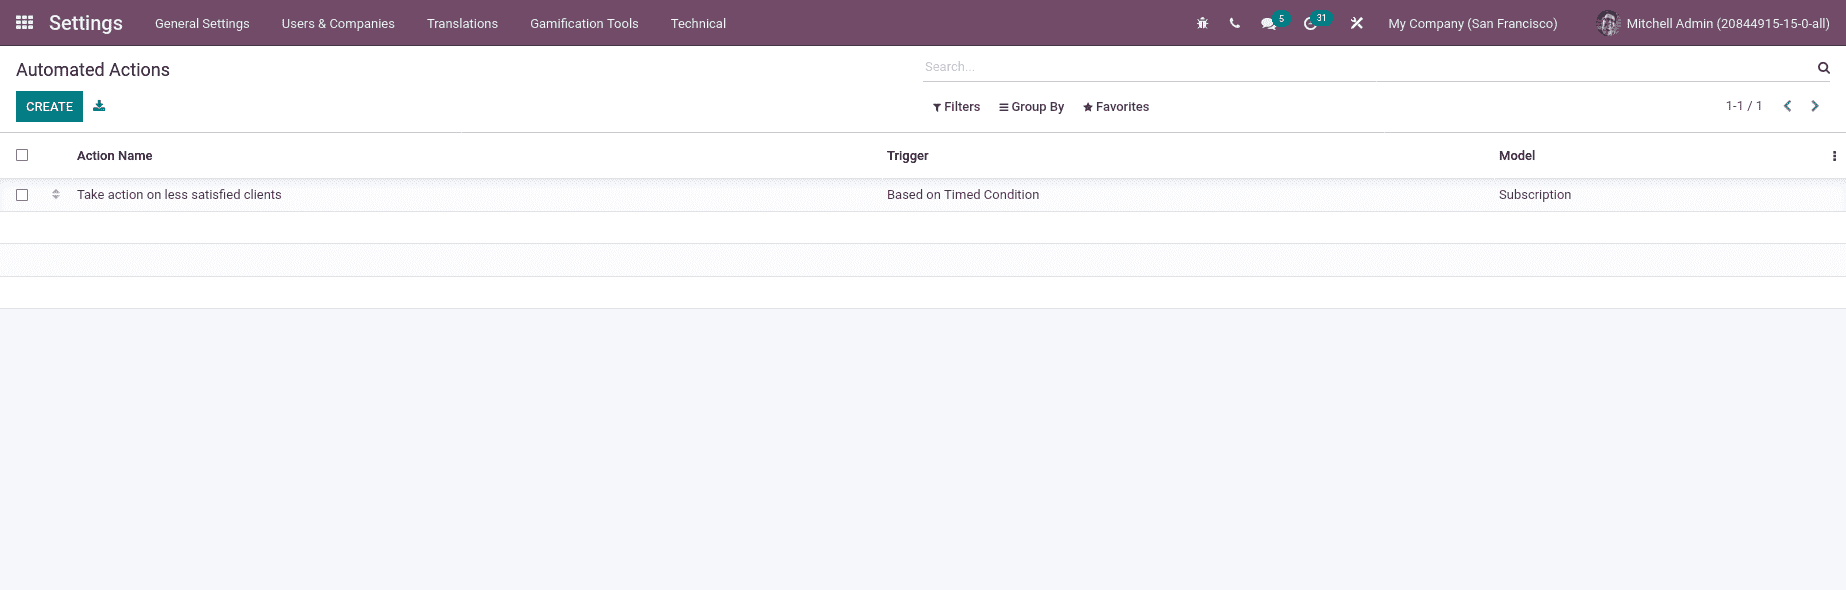 Odoo-Automated-Actions 